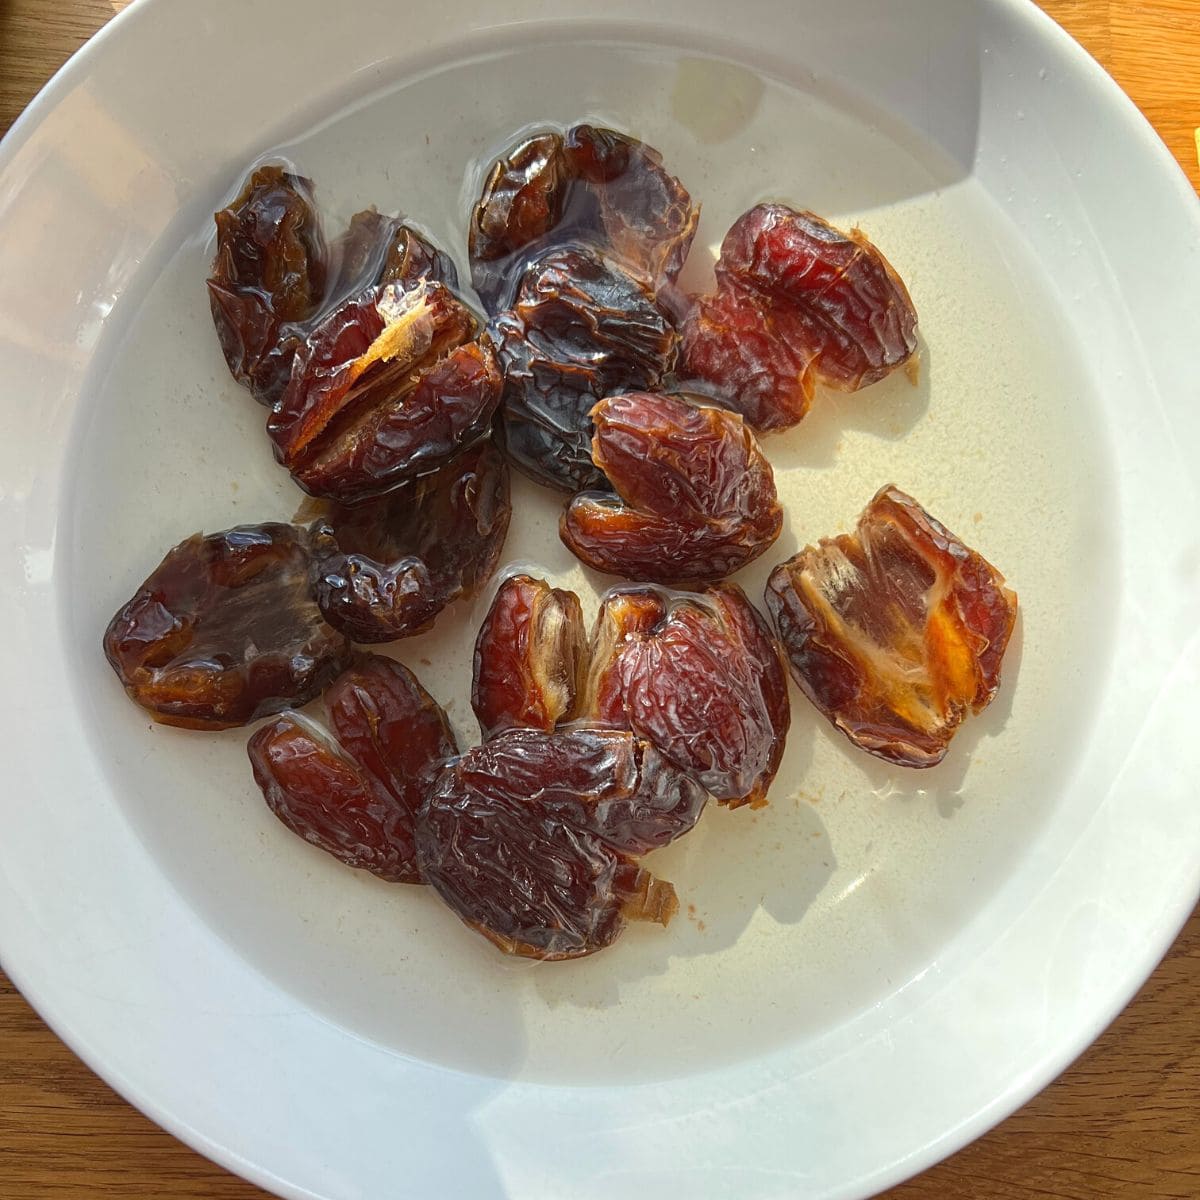 Dates soaking in water in a white bowl.